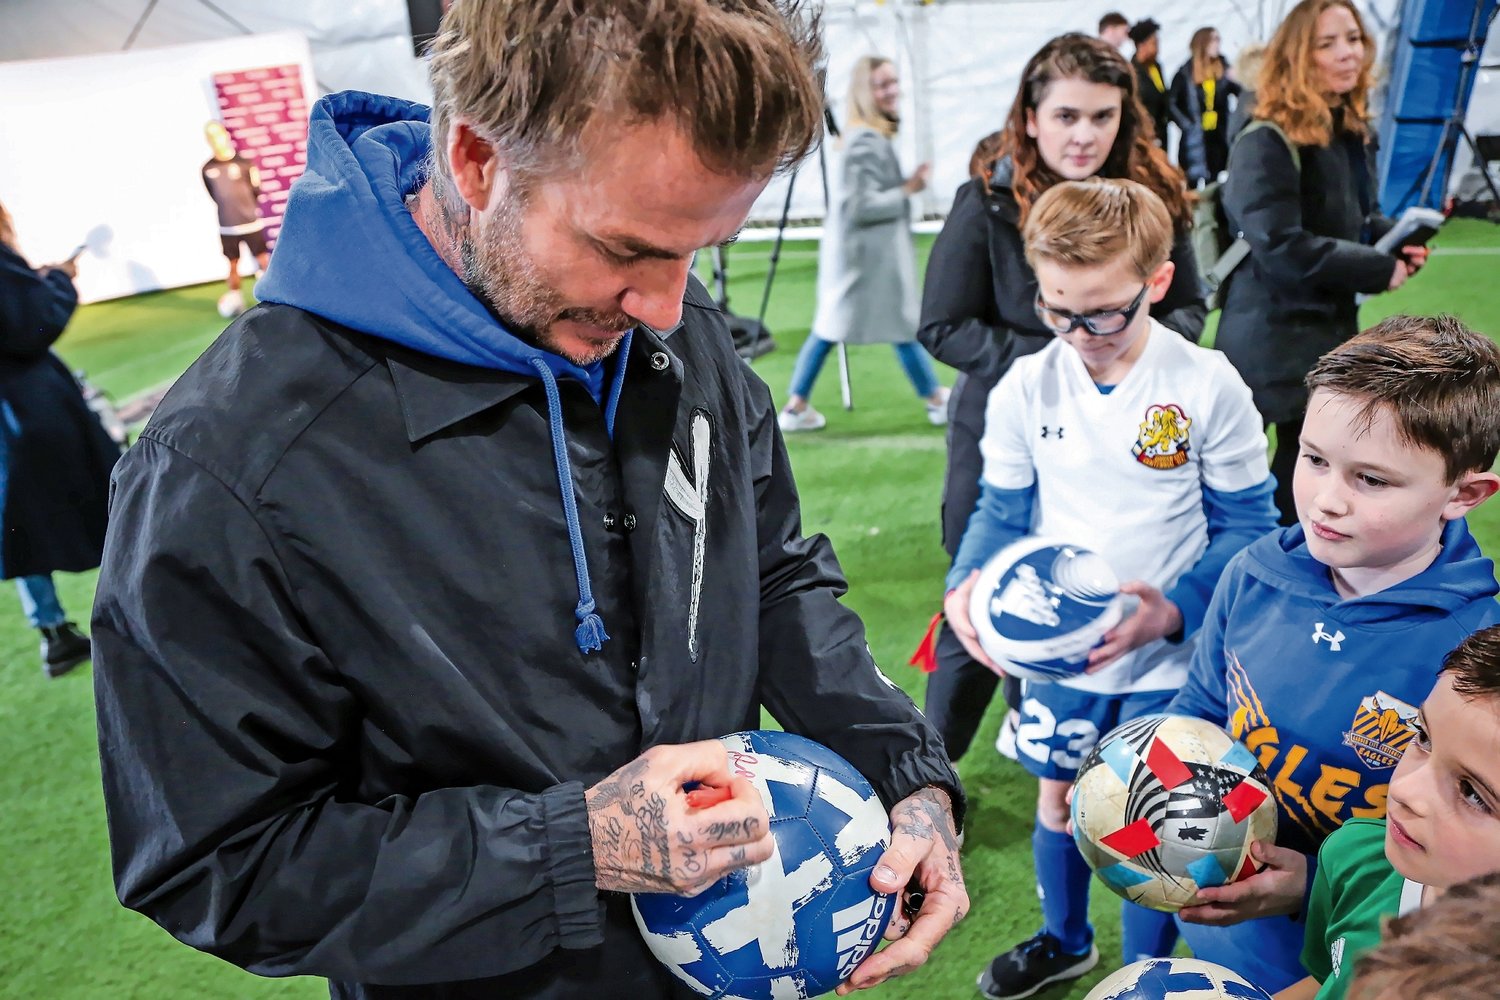 David Beckham signs balls for some of the 400-some young soccer players that gathered at the Mitchell Athletic Complex on Saturday to meet him.